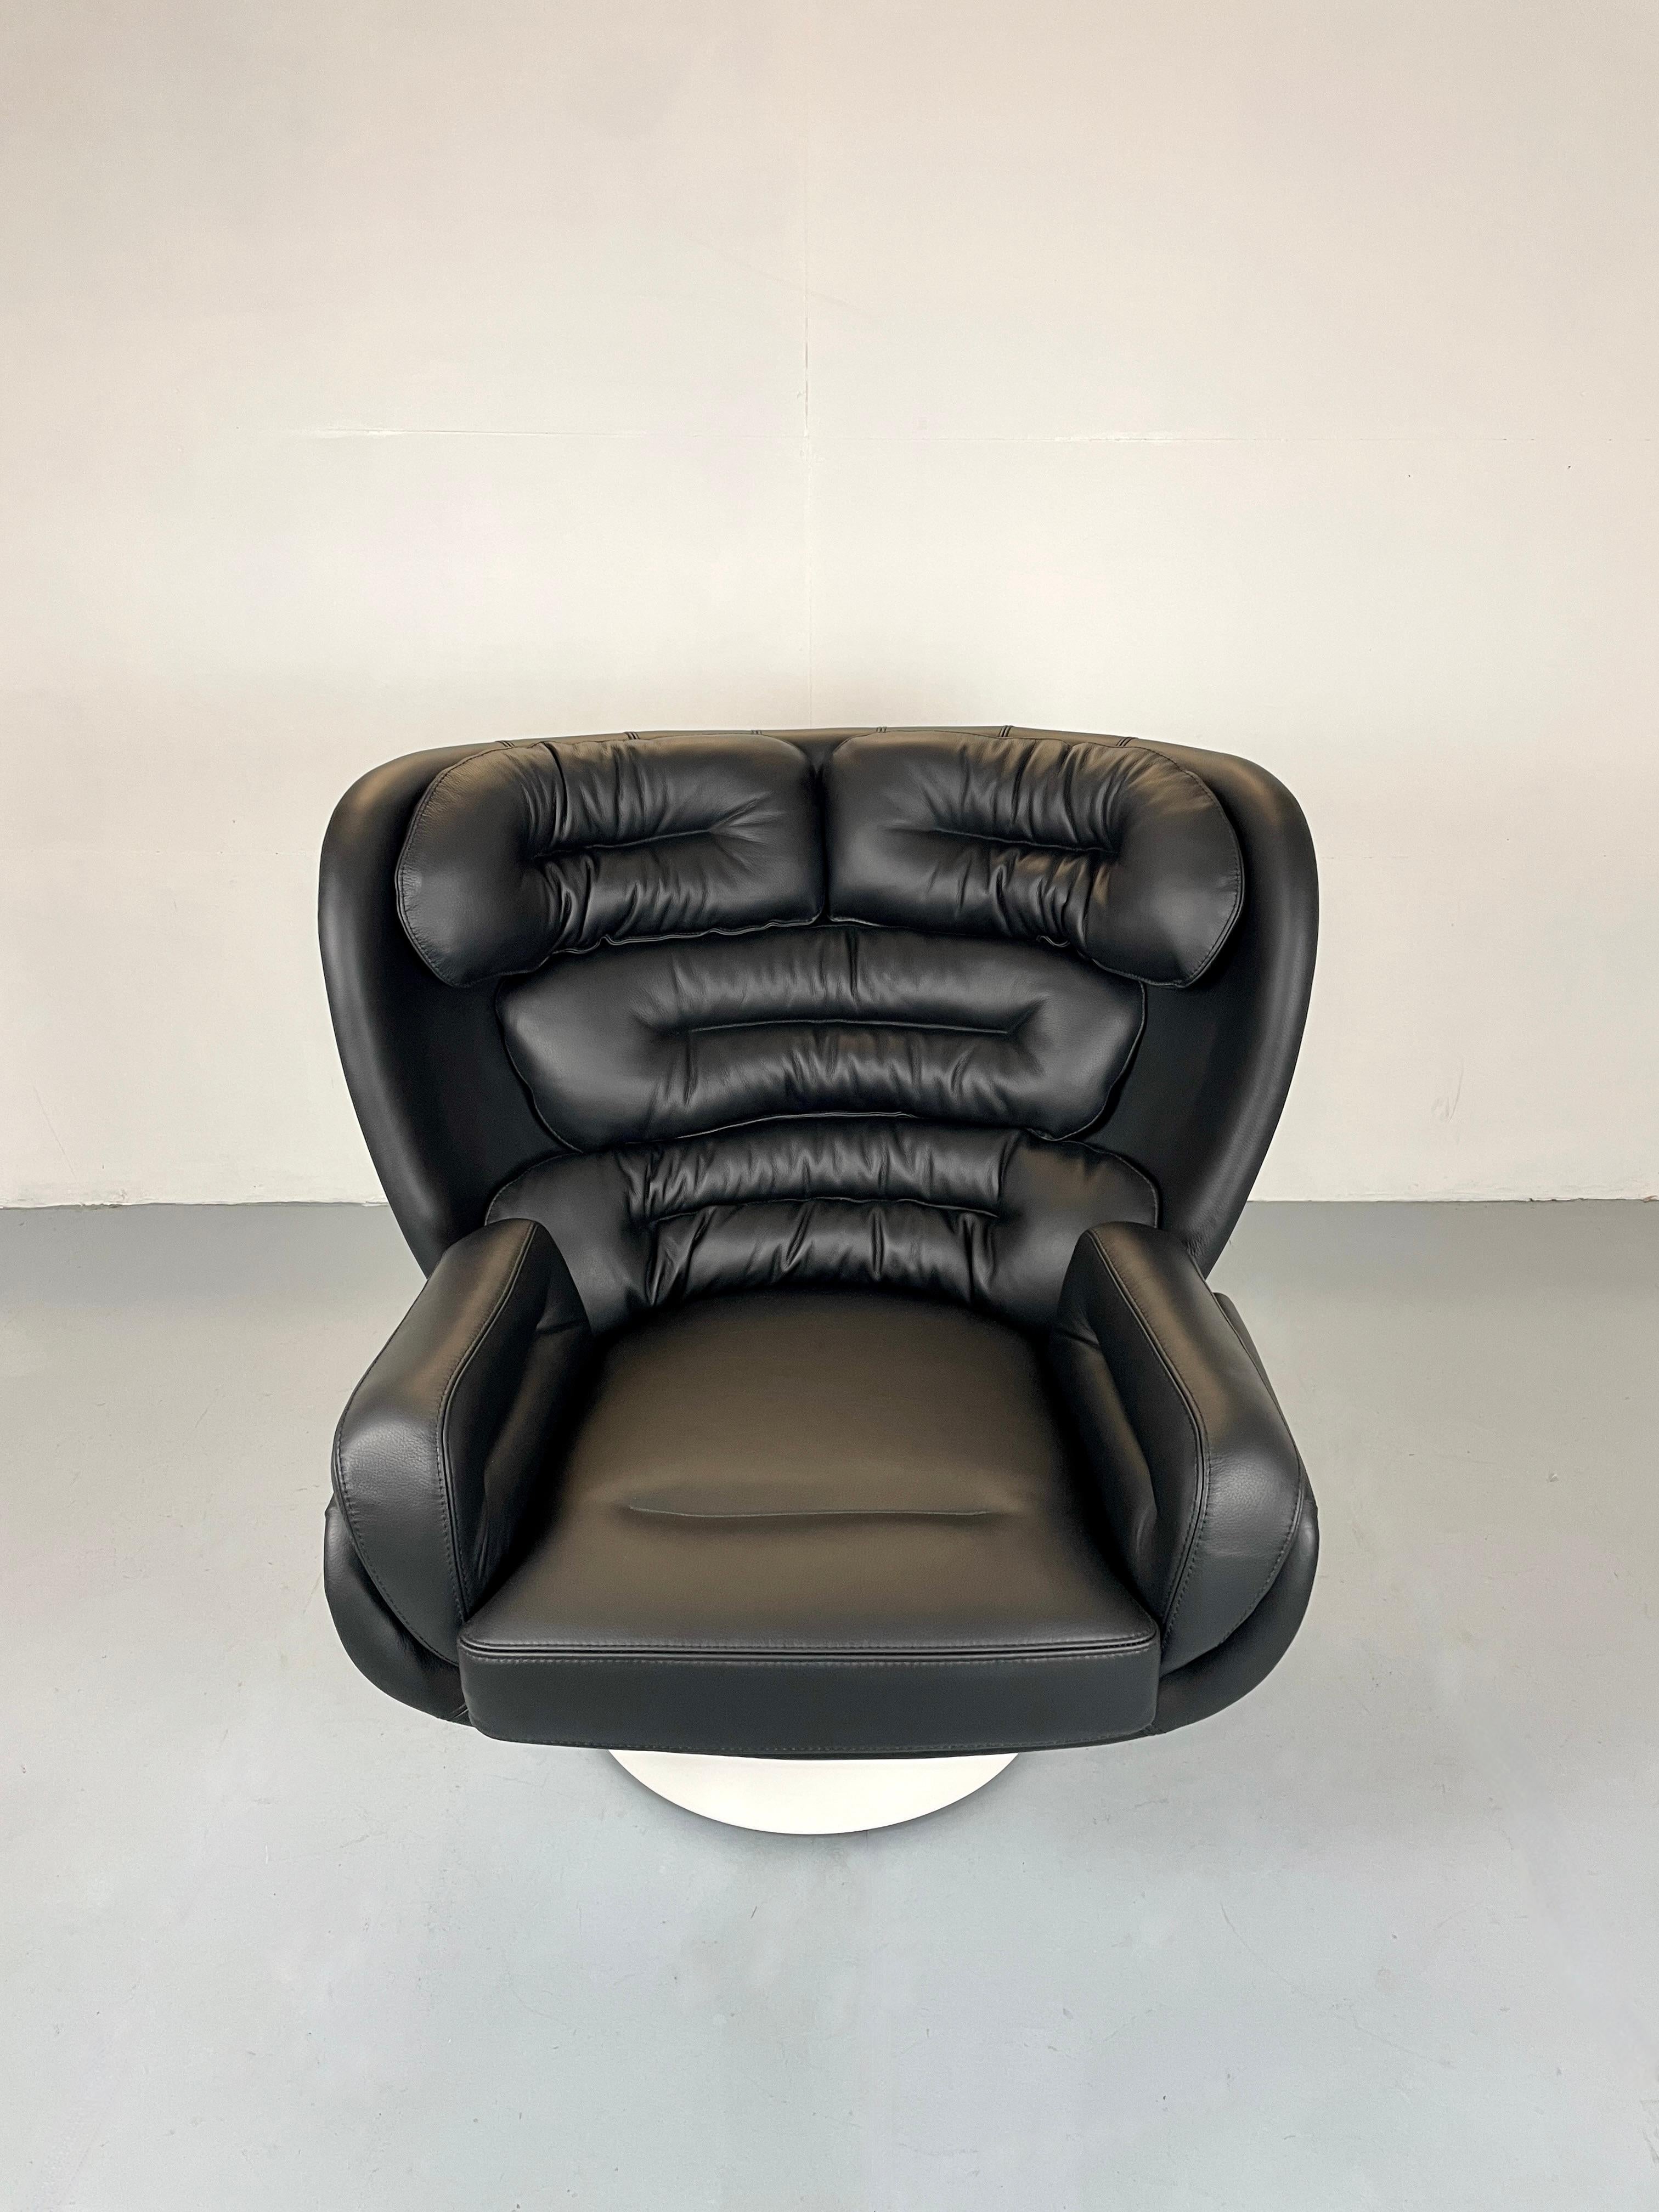 In 1964, Joe Colombo designed the Elda fibreglass armchair for Comfort - it has been produced unchanged in Italy ever since. 

We have currently Elda chairs in stock. They are immediately available. They come with original certificate and box.